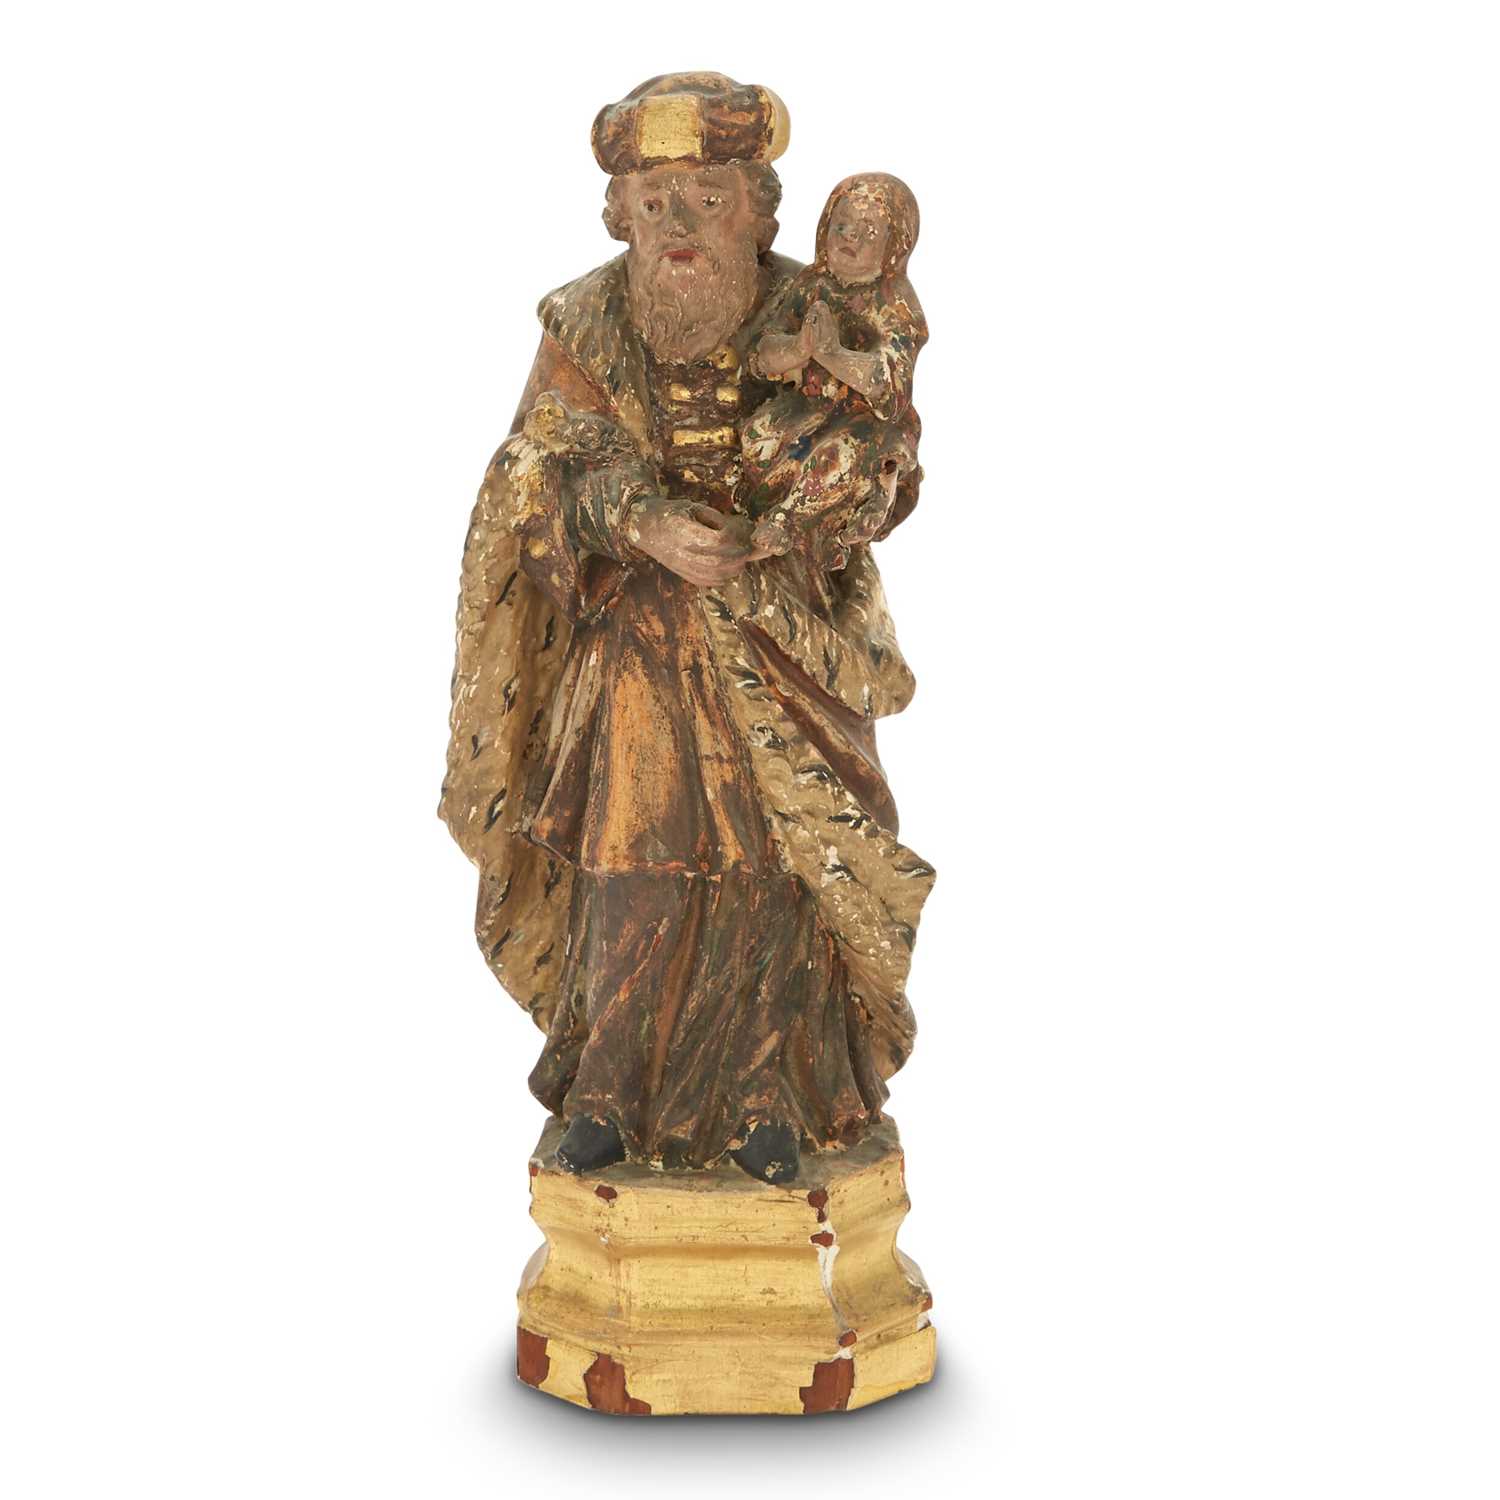 Lot 642 - Continental Polychromed and Parcel-Gilt of a Male Saint Holding a Young Girl